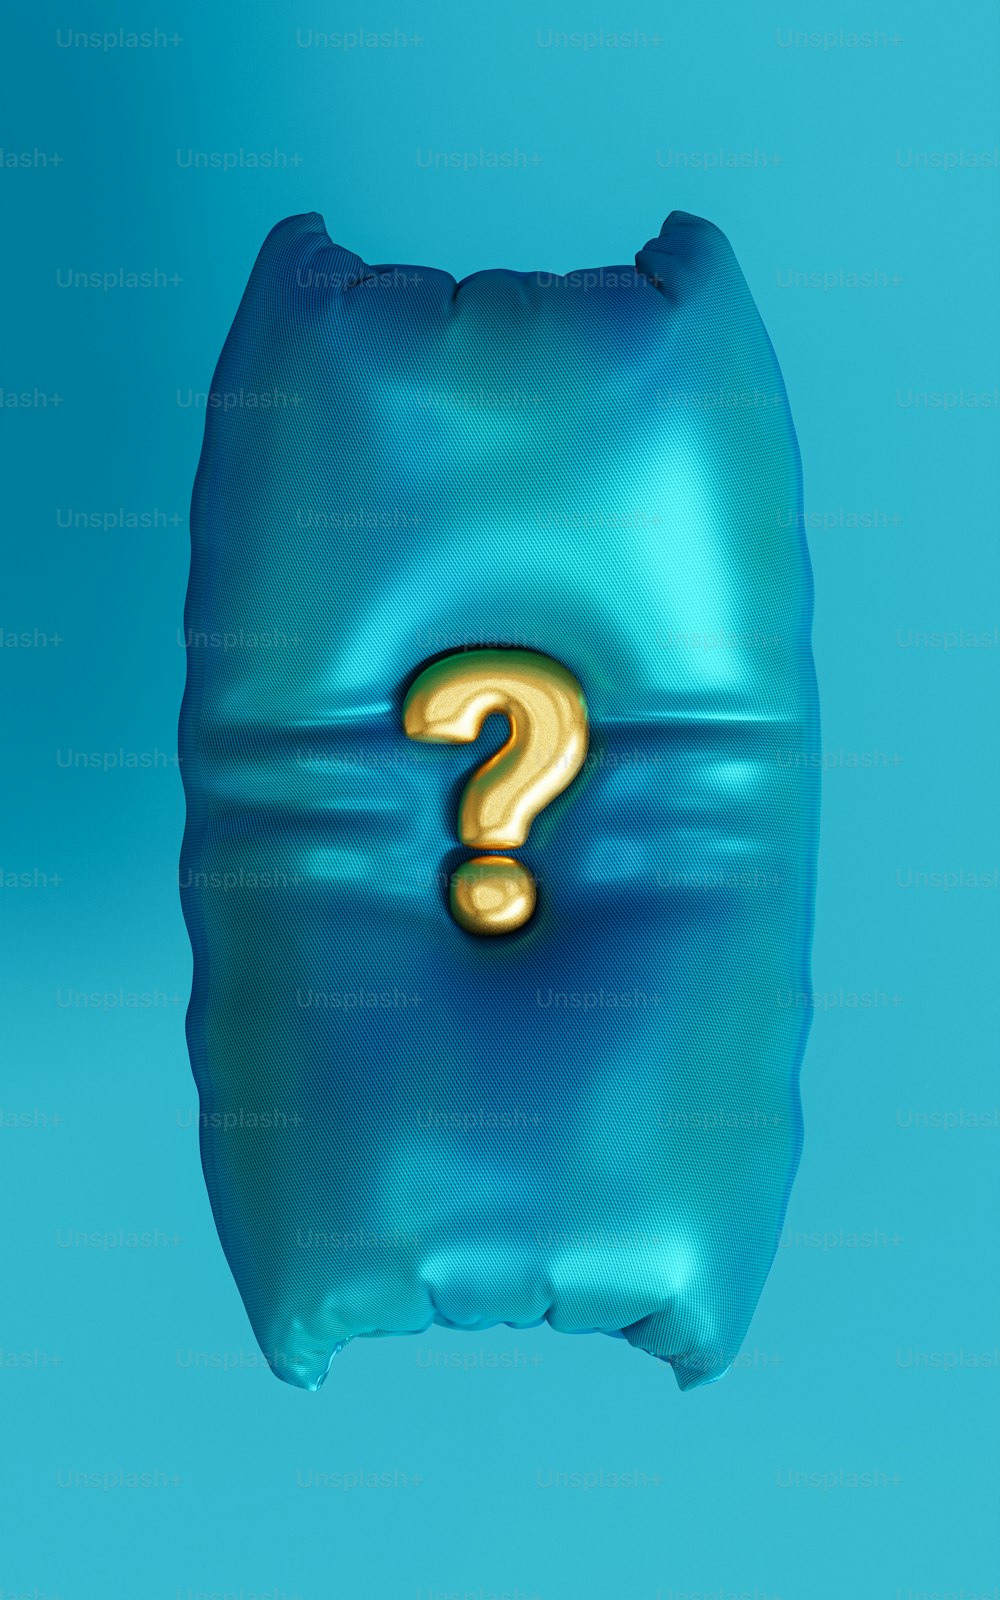 a blue bag with a question mark on it